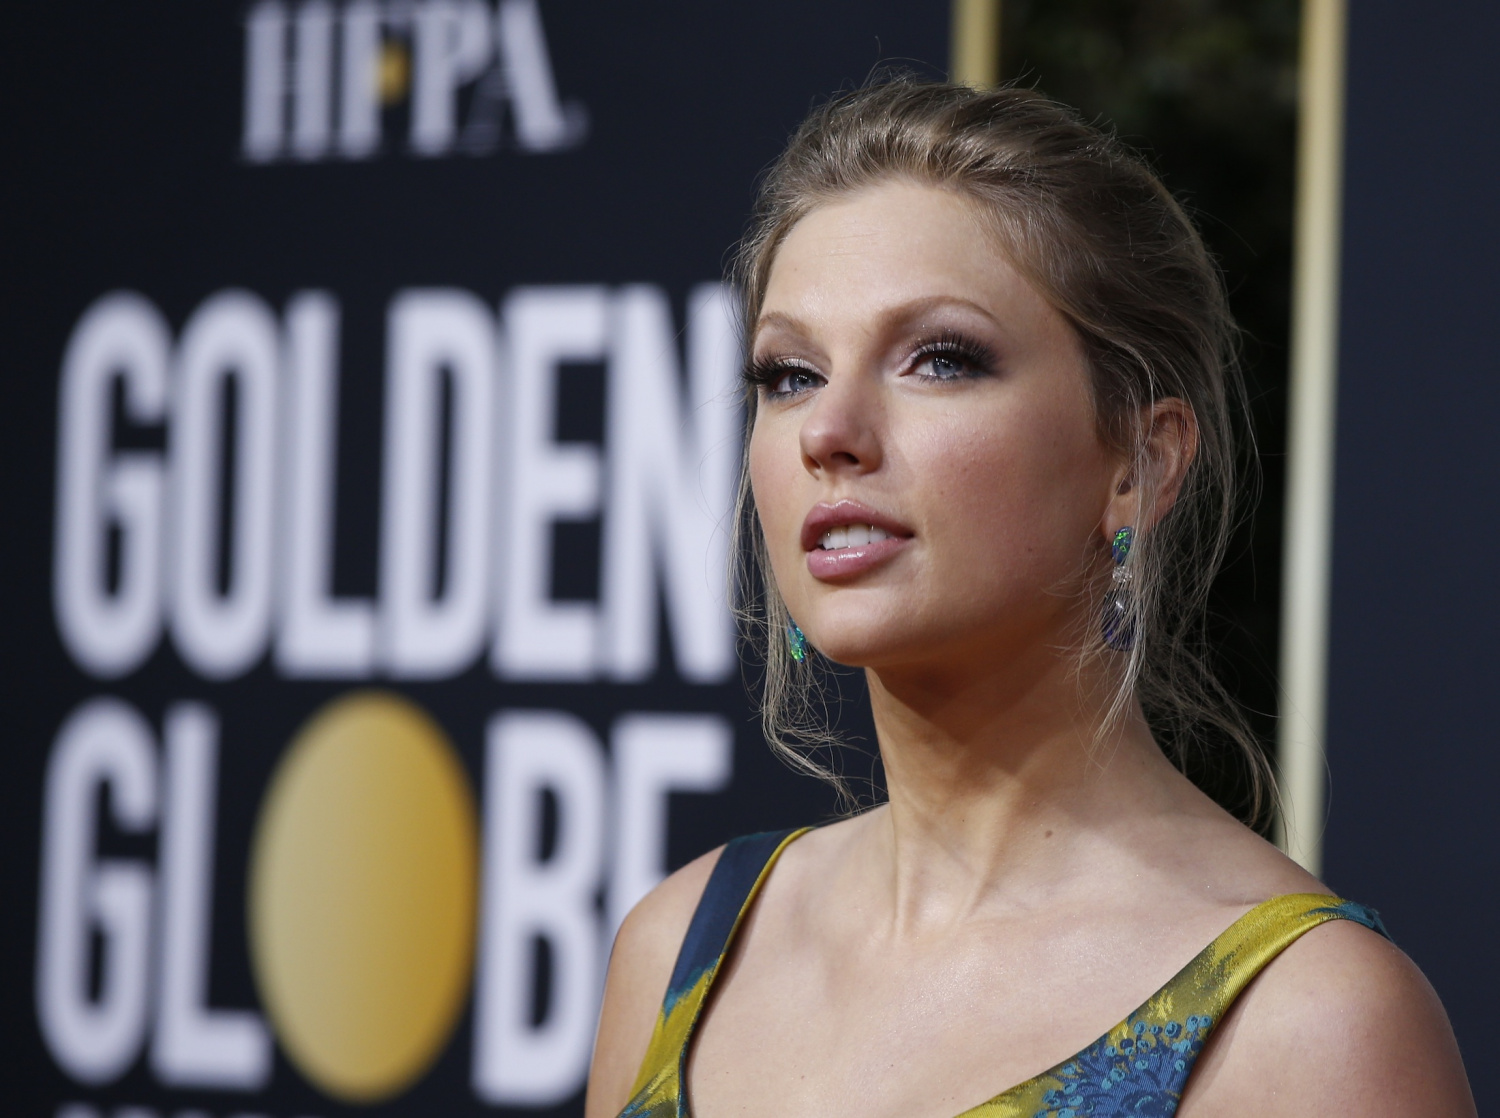 Taylor Swift's Political Endorsement Could Tip the Scales in 2024 Election